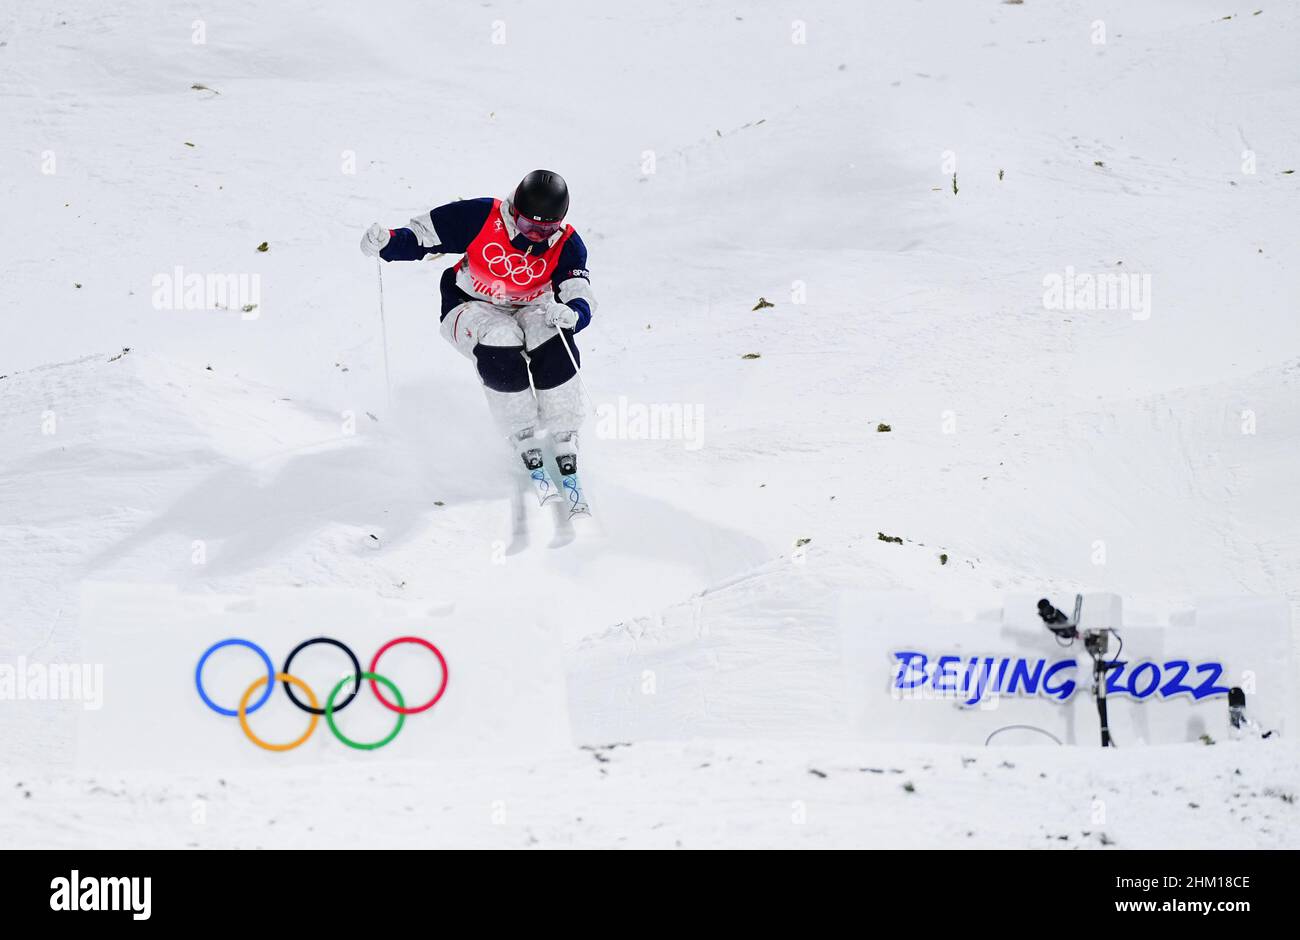 Zhangjiakou, China's Hebei Province. 6th Feb, 2022. Jaelin Kauf of the United States competes during the freestyle?skiing women's moguls final?at the Genting Snow Park in Zhangjiakou, north China's Hebei Province, Feb. 6, 2022. Credit: Xu Chang/Xinhua/Alamy Live News Stock Photo